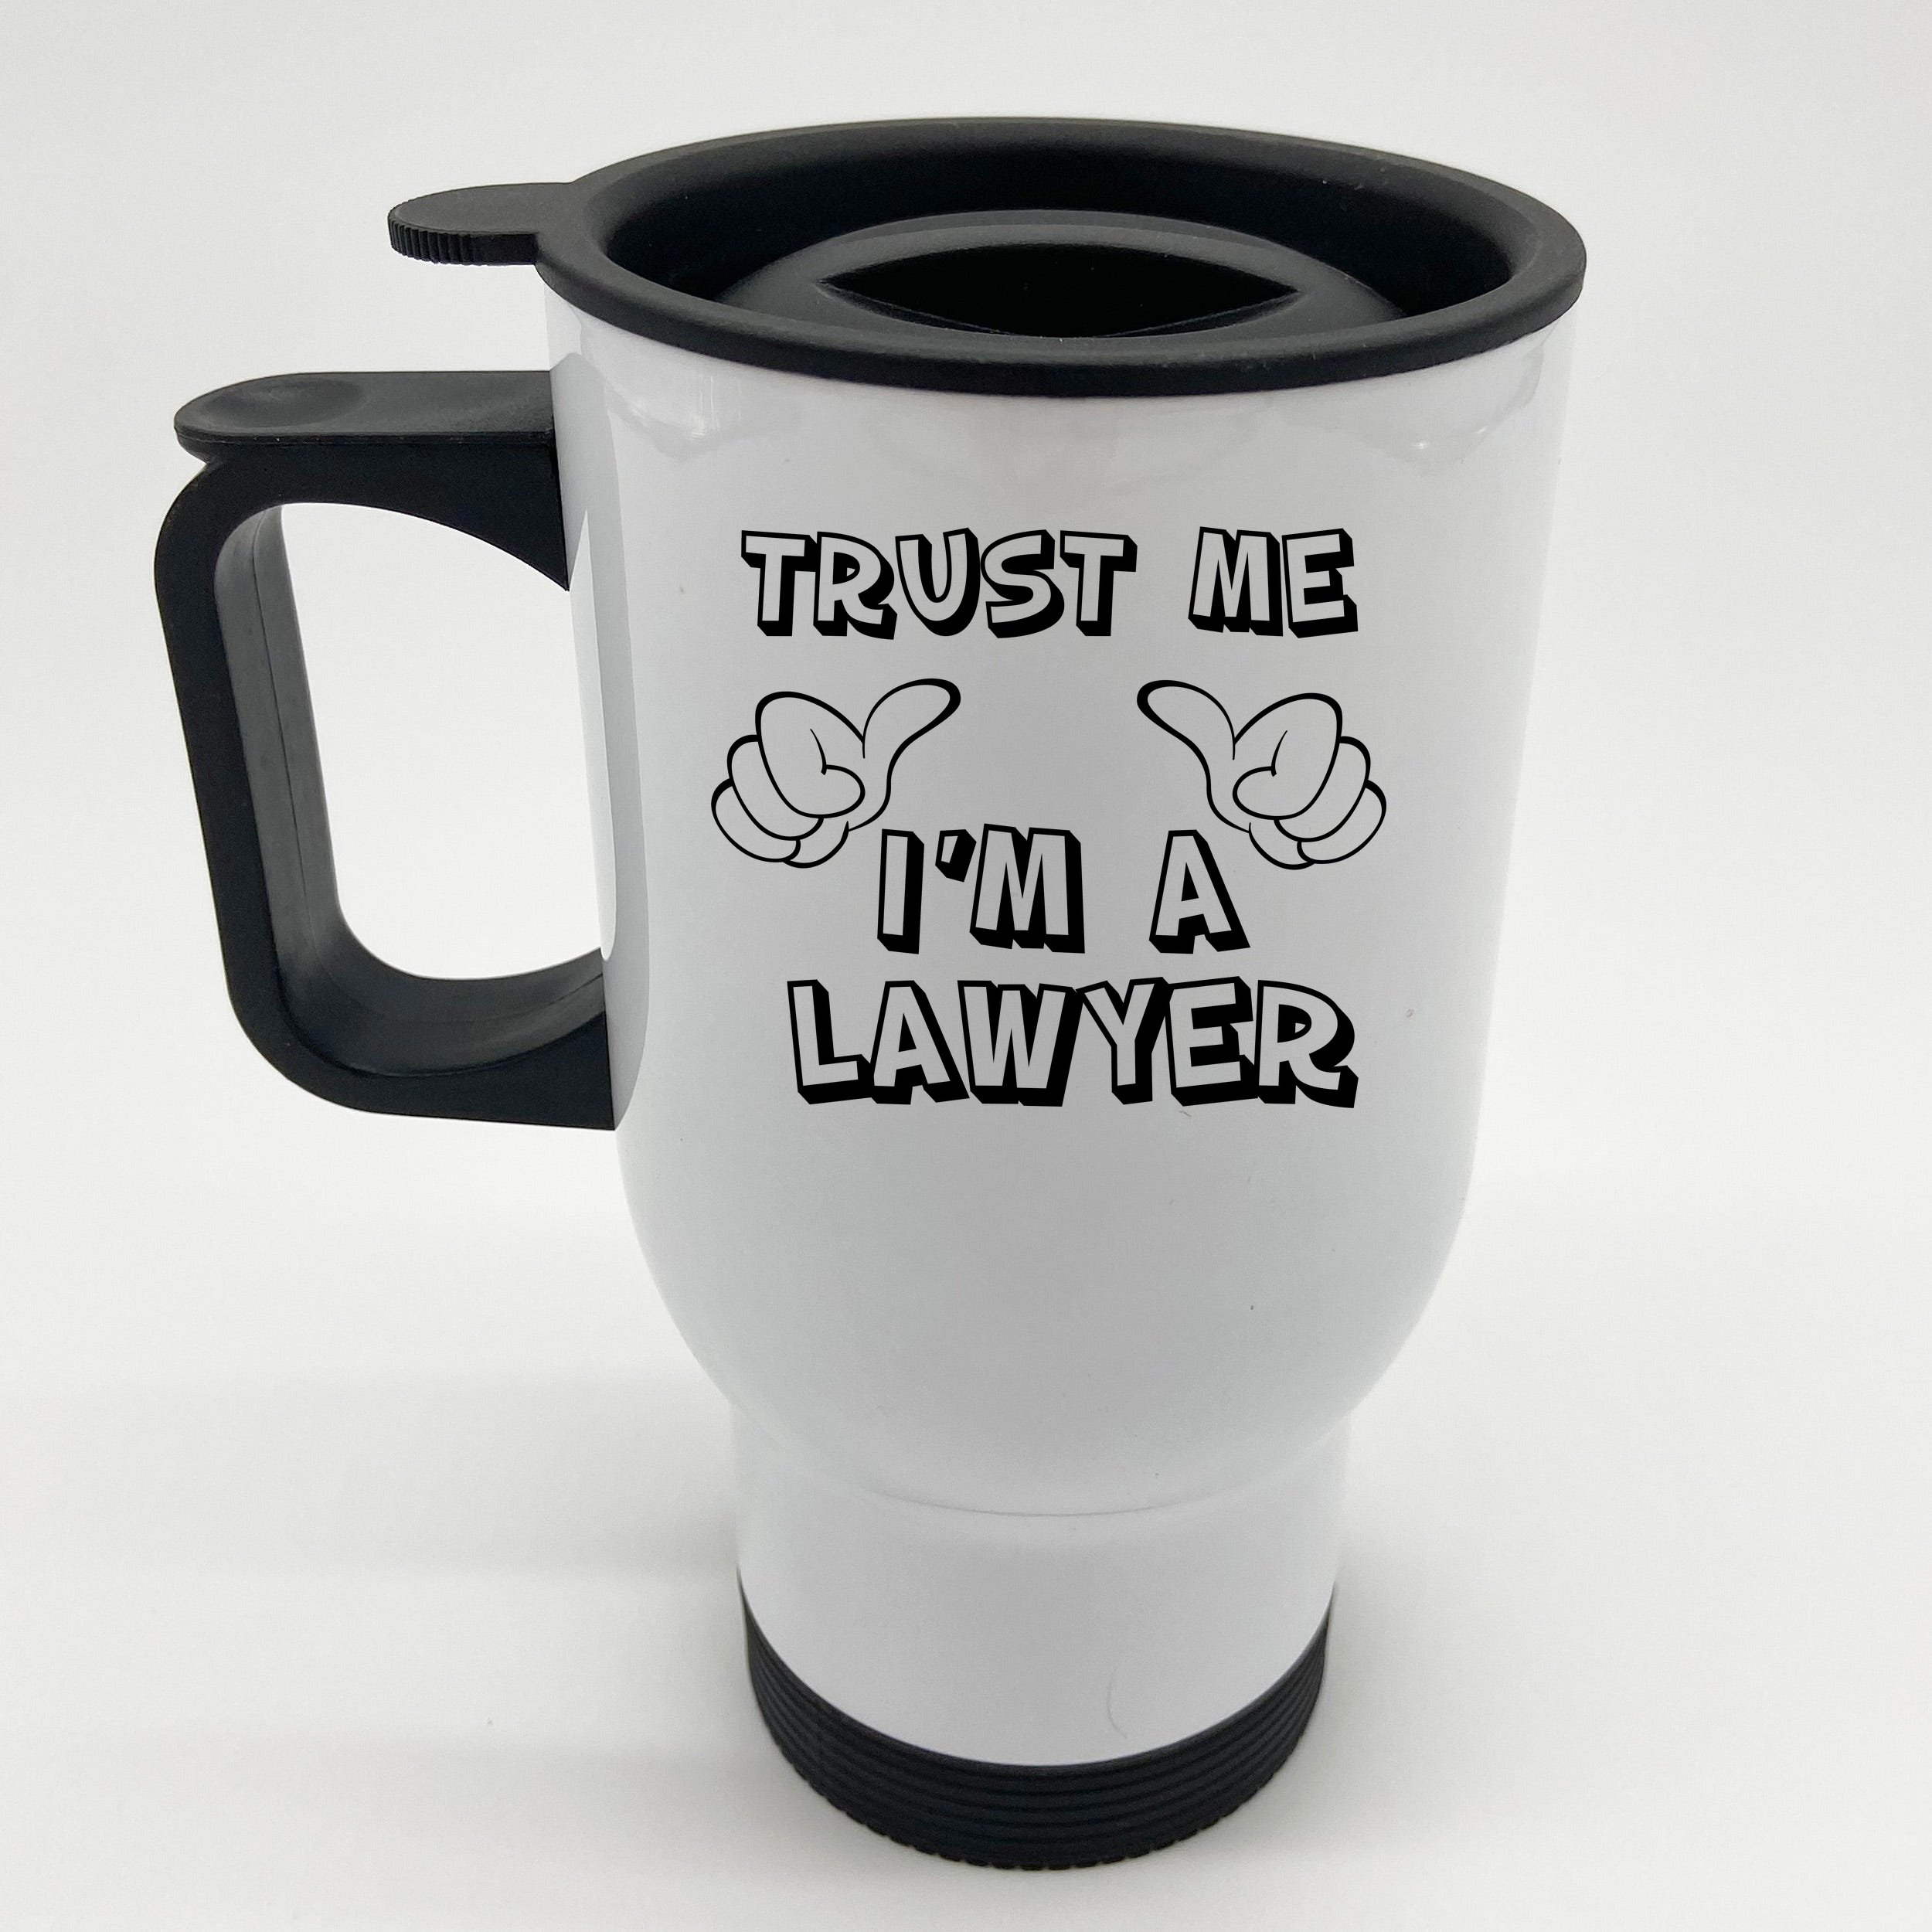 Stainless Steel Insulated 16oz Travel Mug Coffee Cup Trust Me I'm A Lawyer 